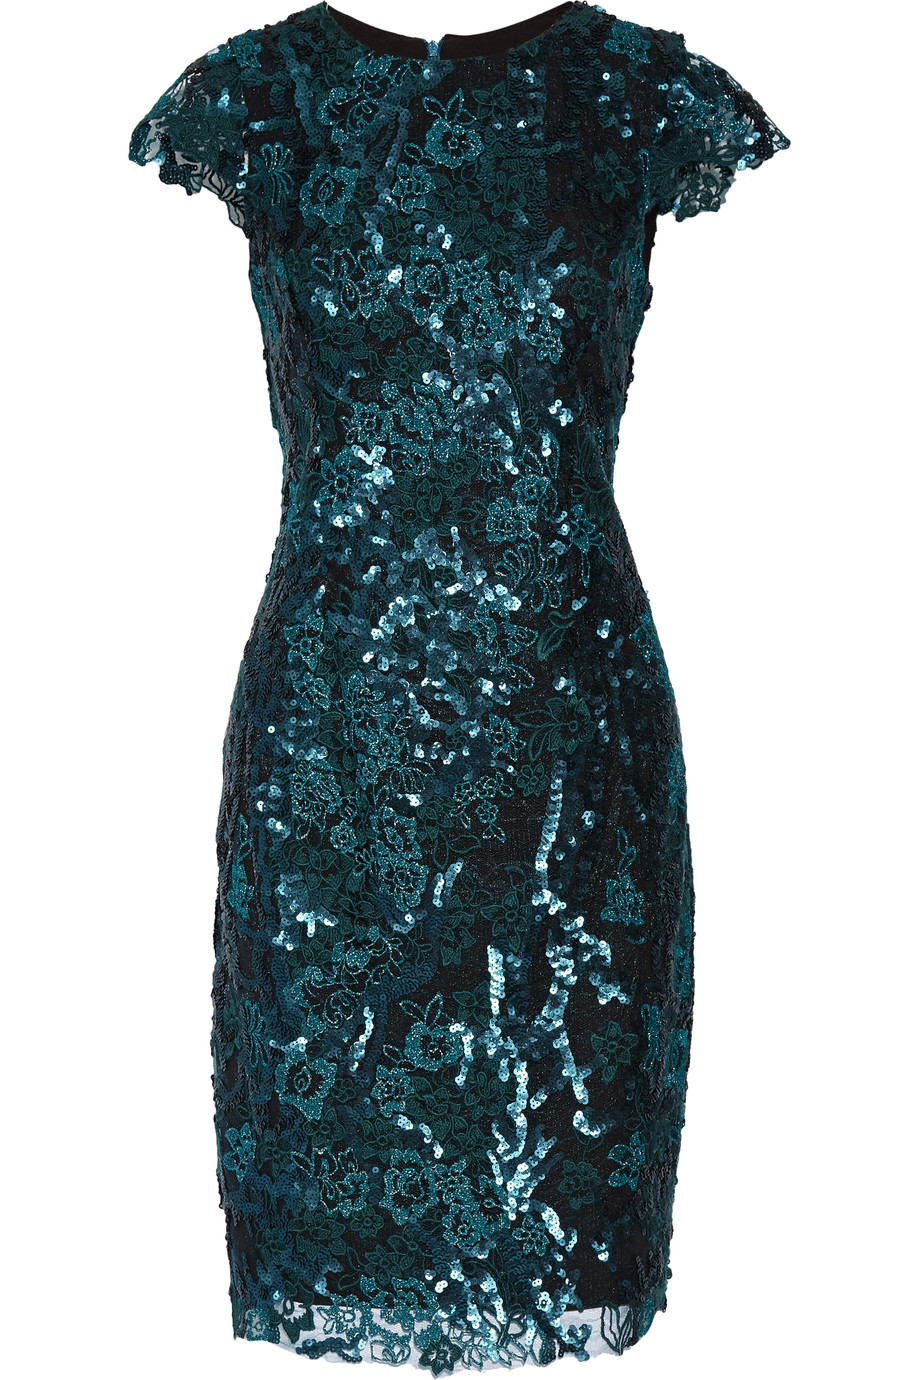 Badgley Mischka Sequined Corded Lace Dress | ModeSens